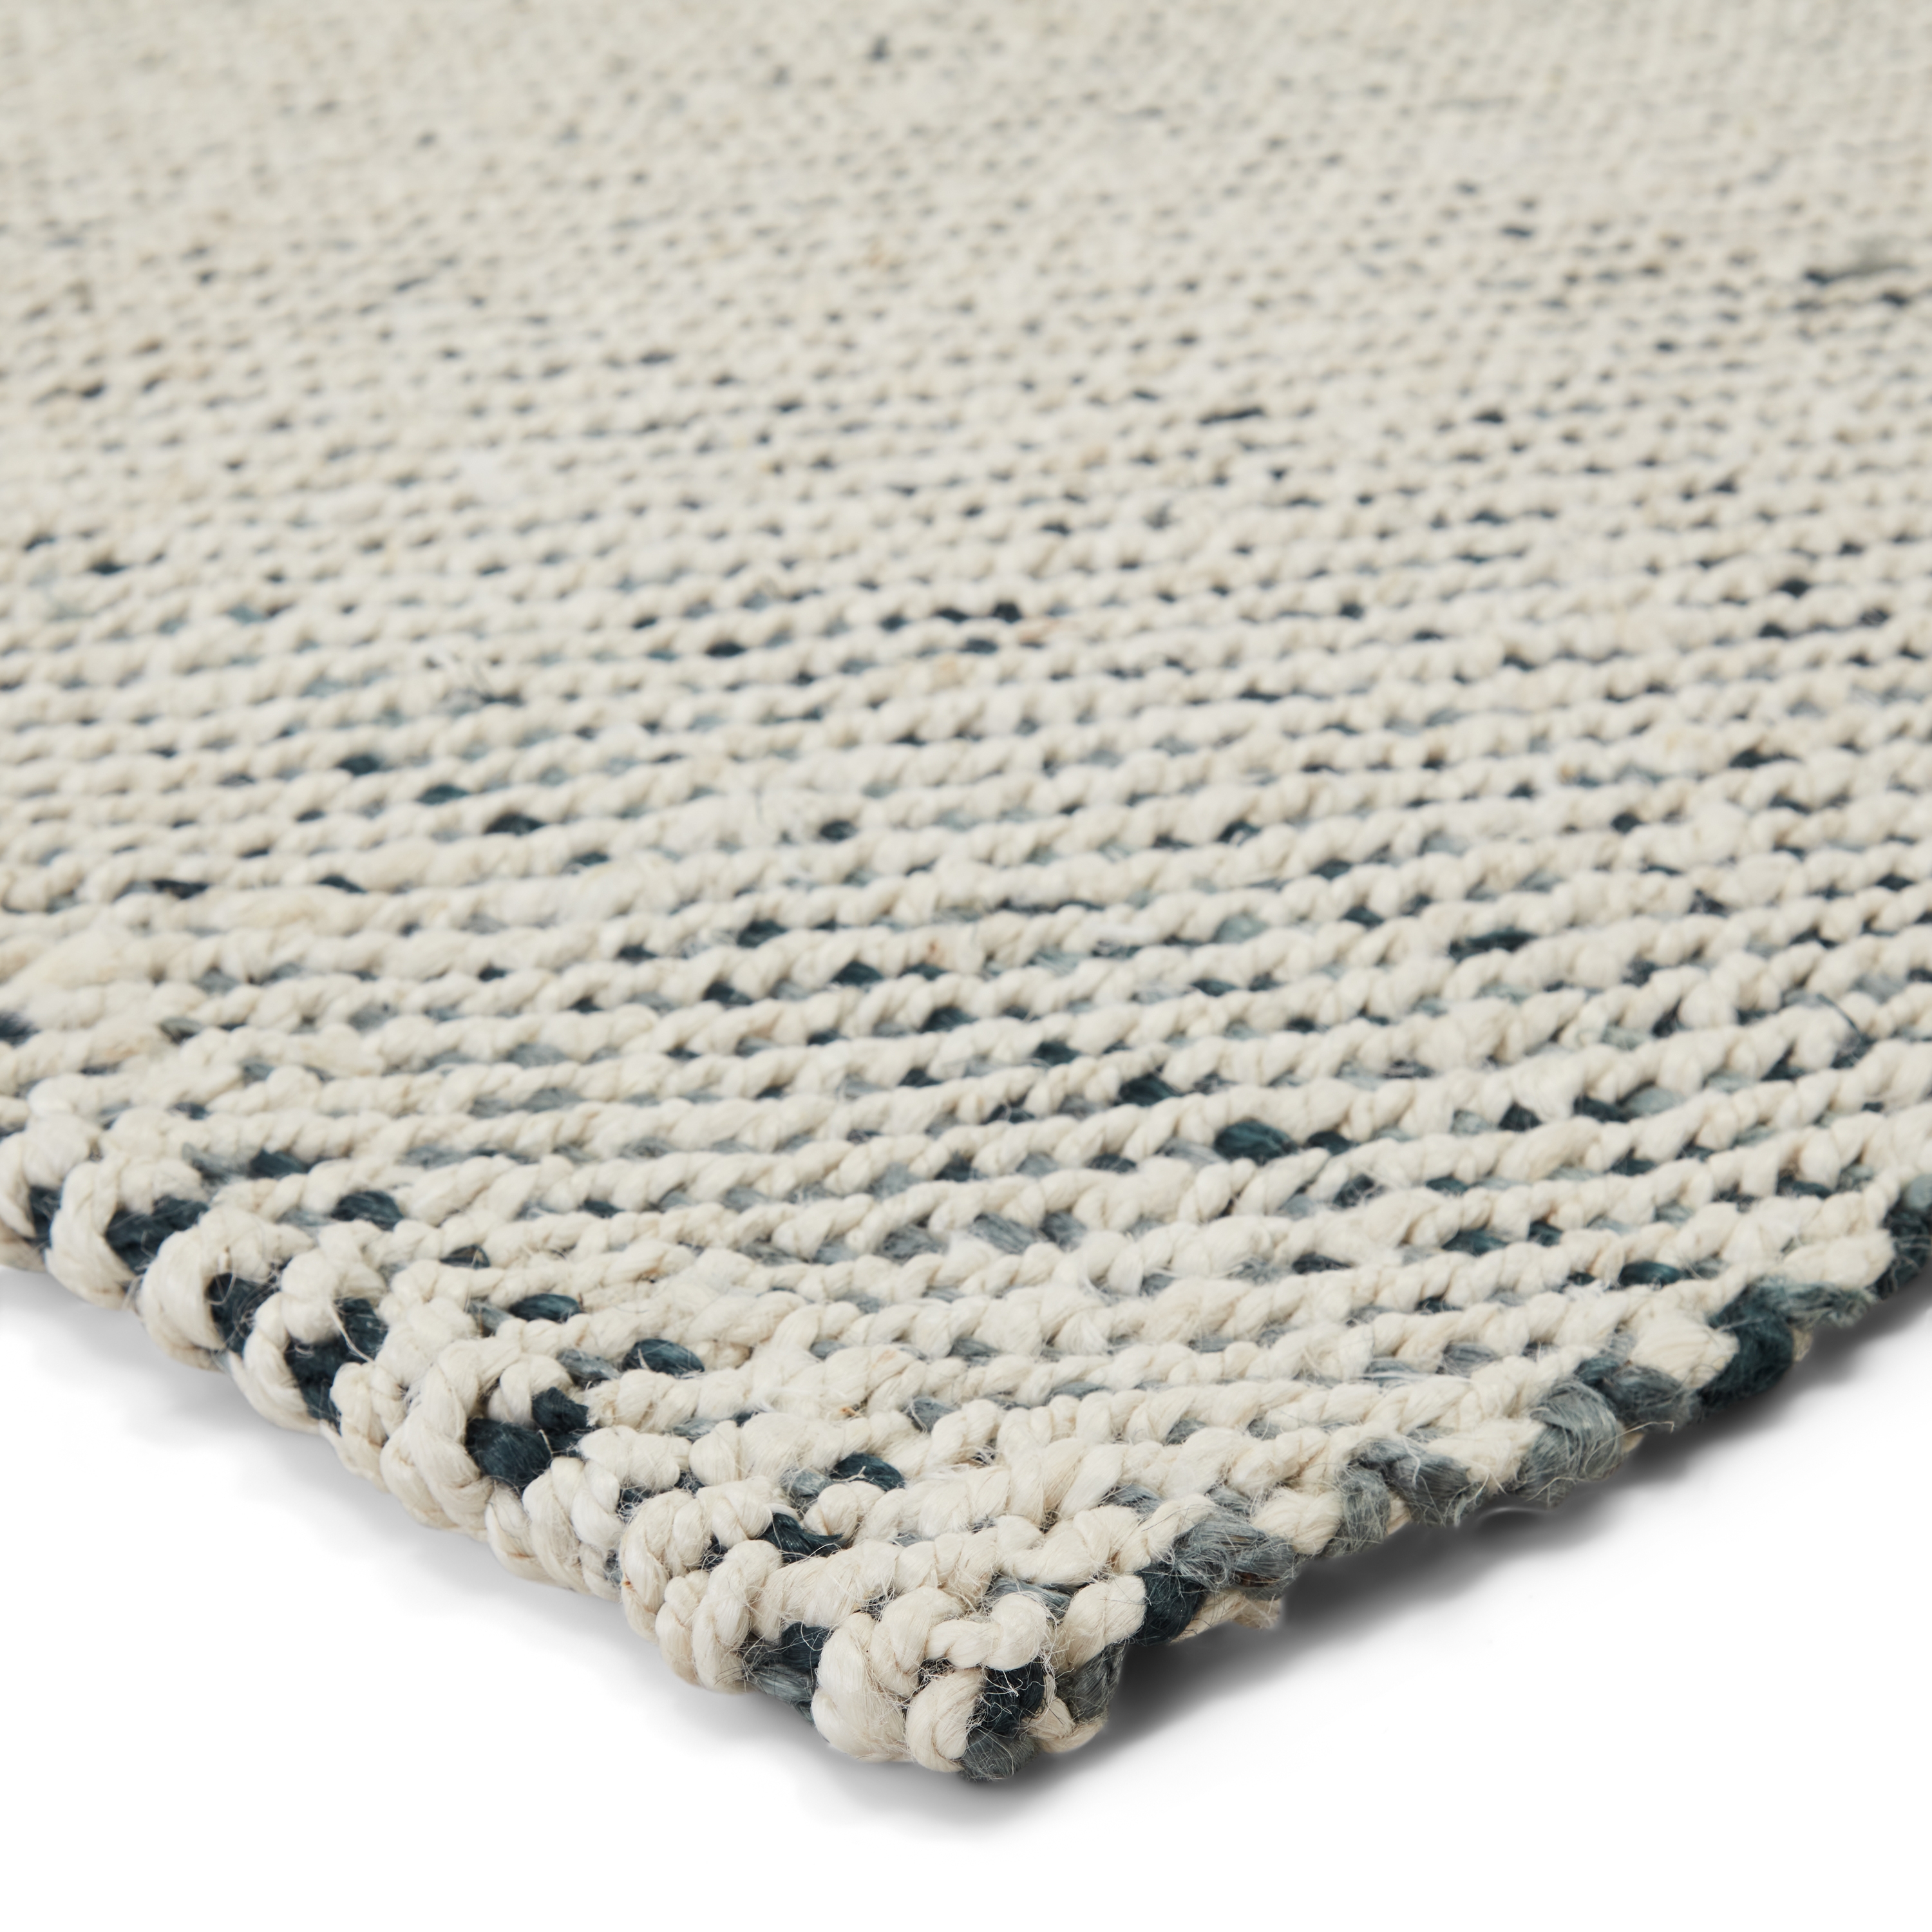 Almand Natural Solid White/ Gray Area Rug (8' X 10') - Image 1